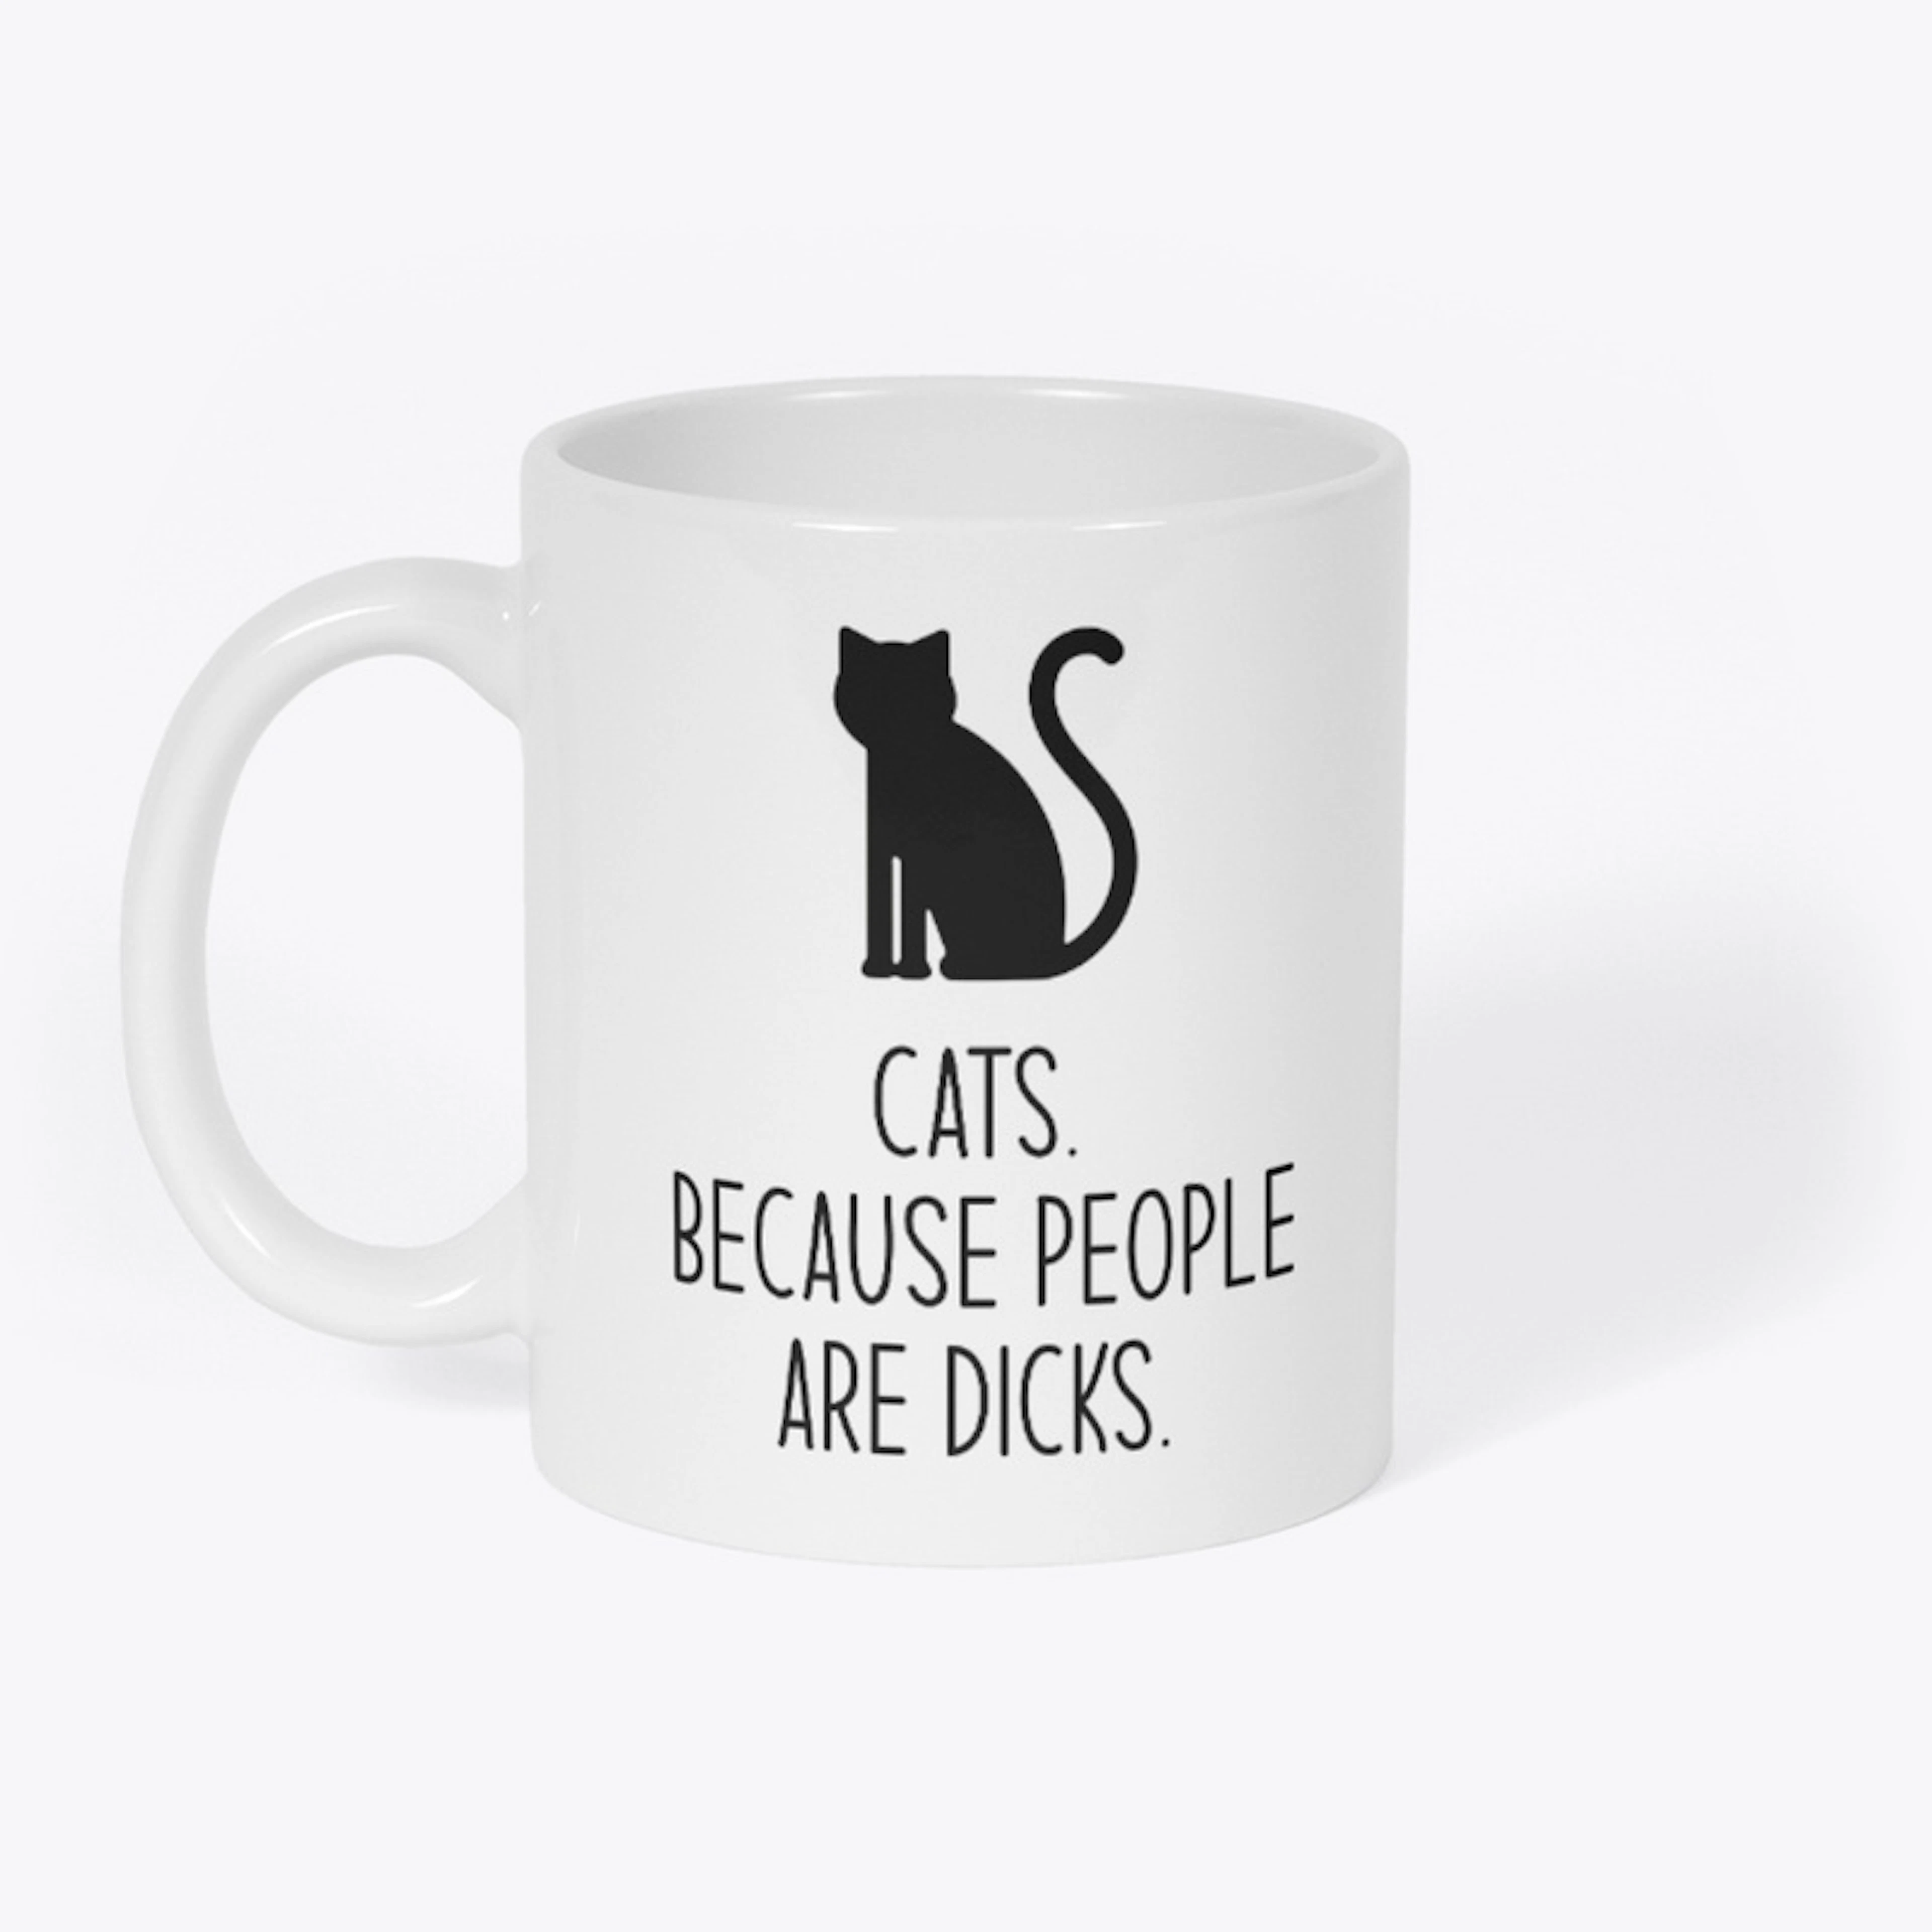 CATS BECAUSE PEOPLE ARE D$*&S